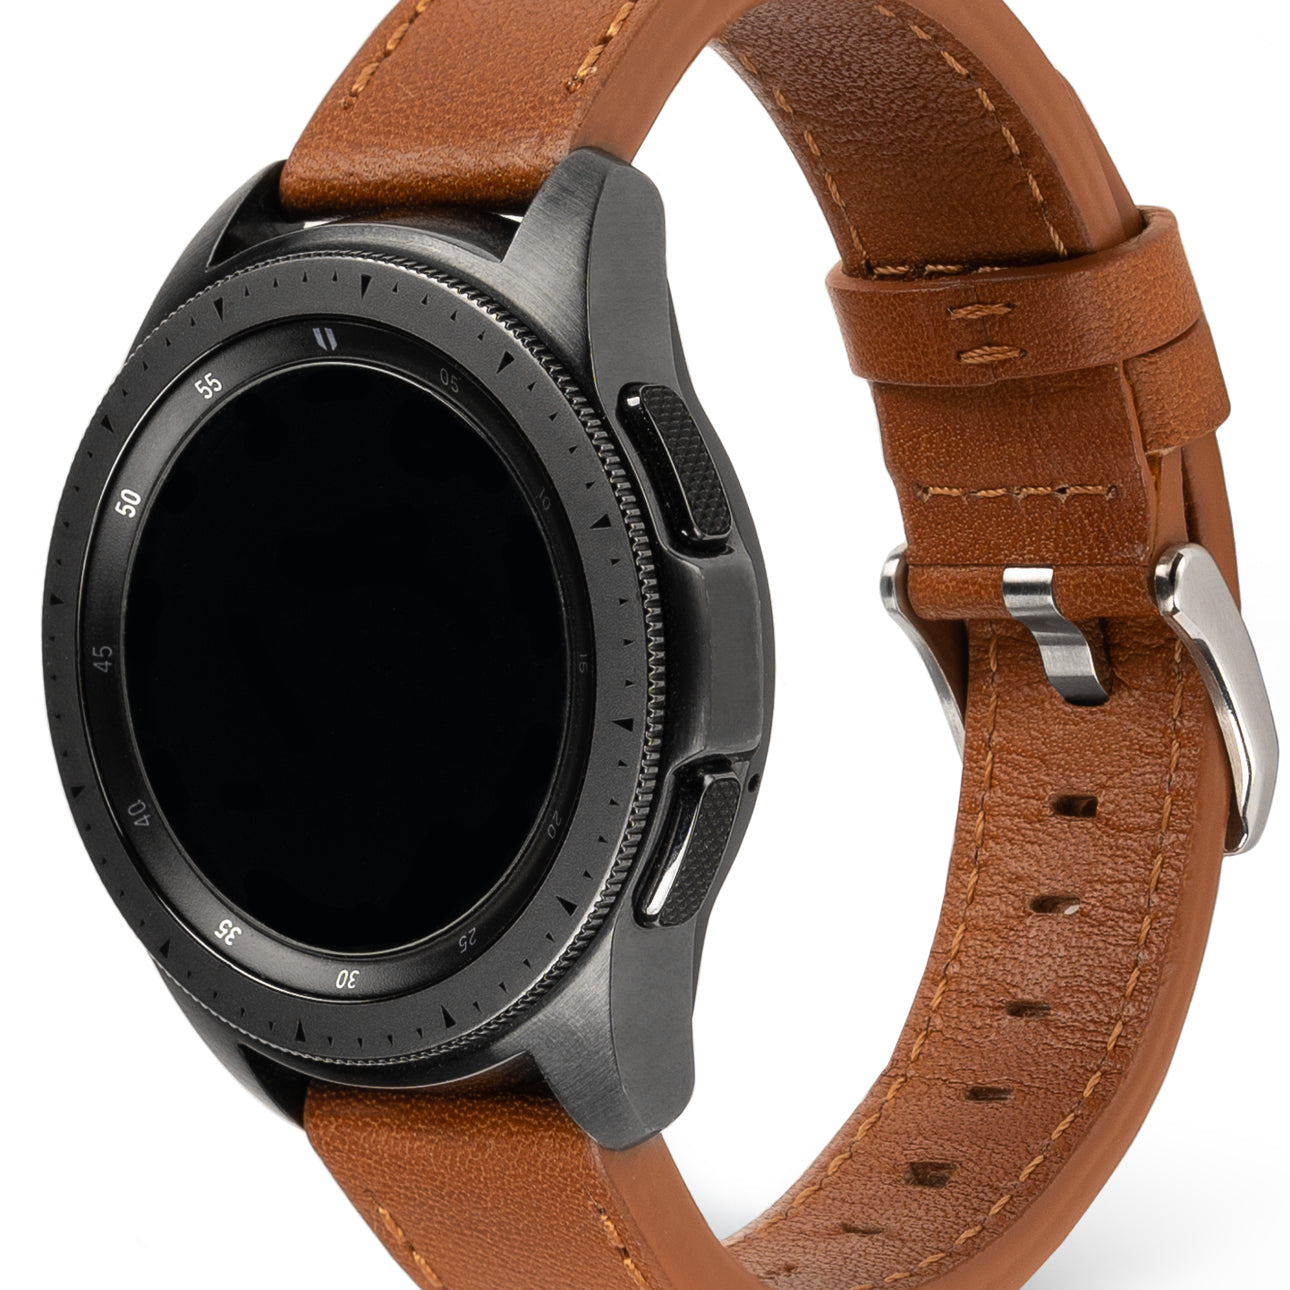 smartwatch band - ringke leather one classic band for watch lug size 20mm - compatible with glaaxy watch 3 41mm | galaxy watch 42mm | galaxy watch active 2 44mm